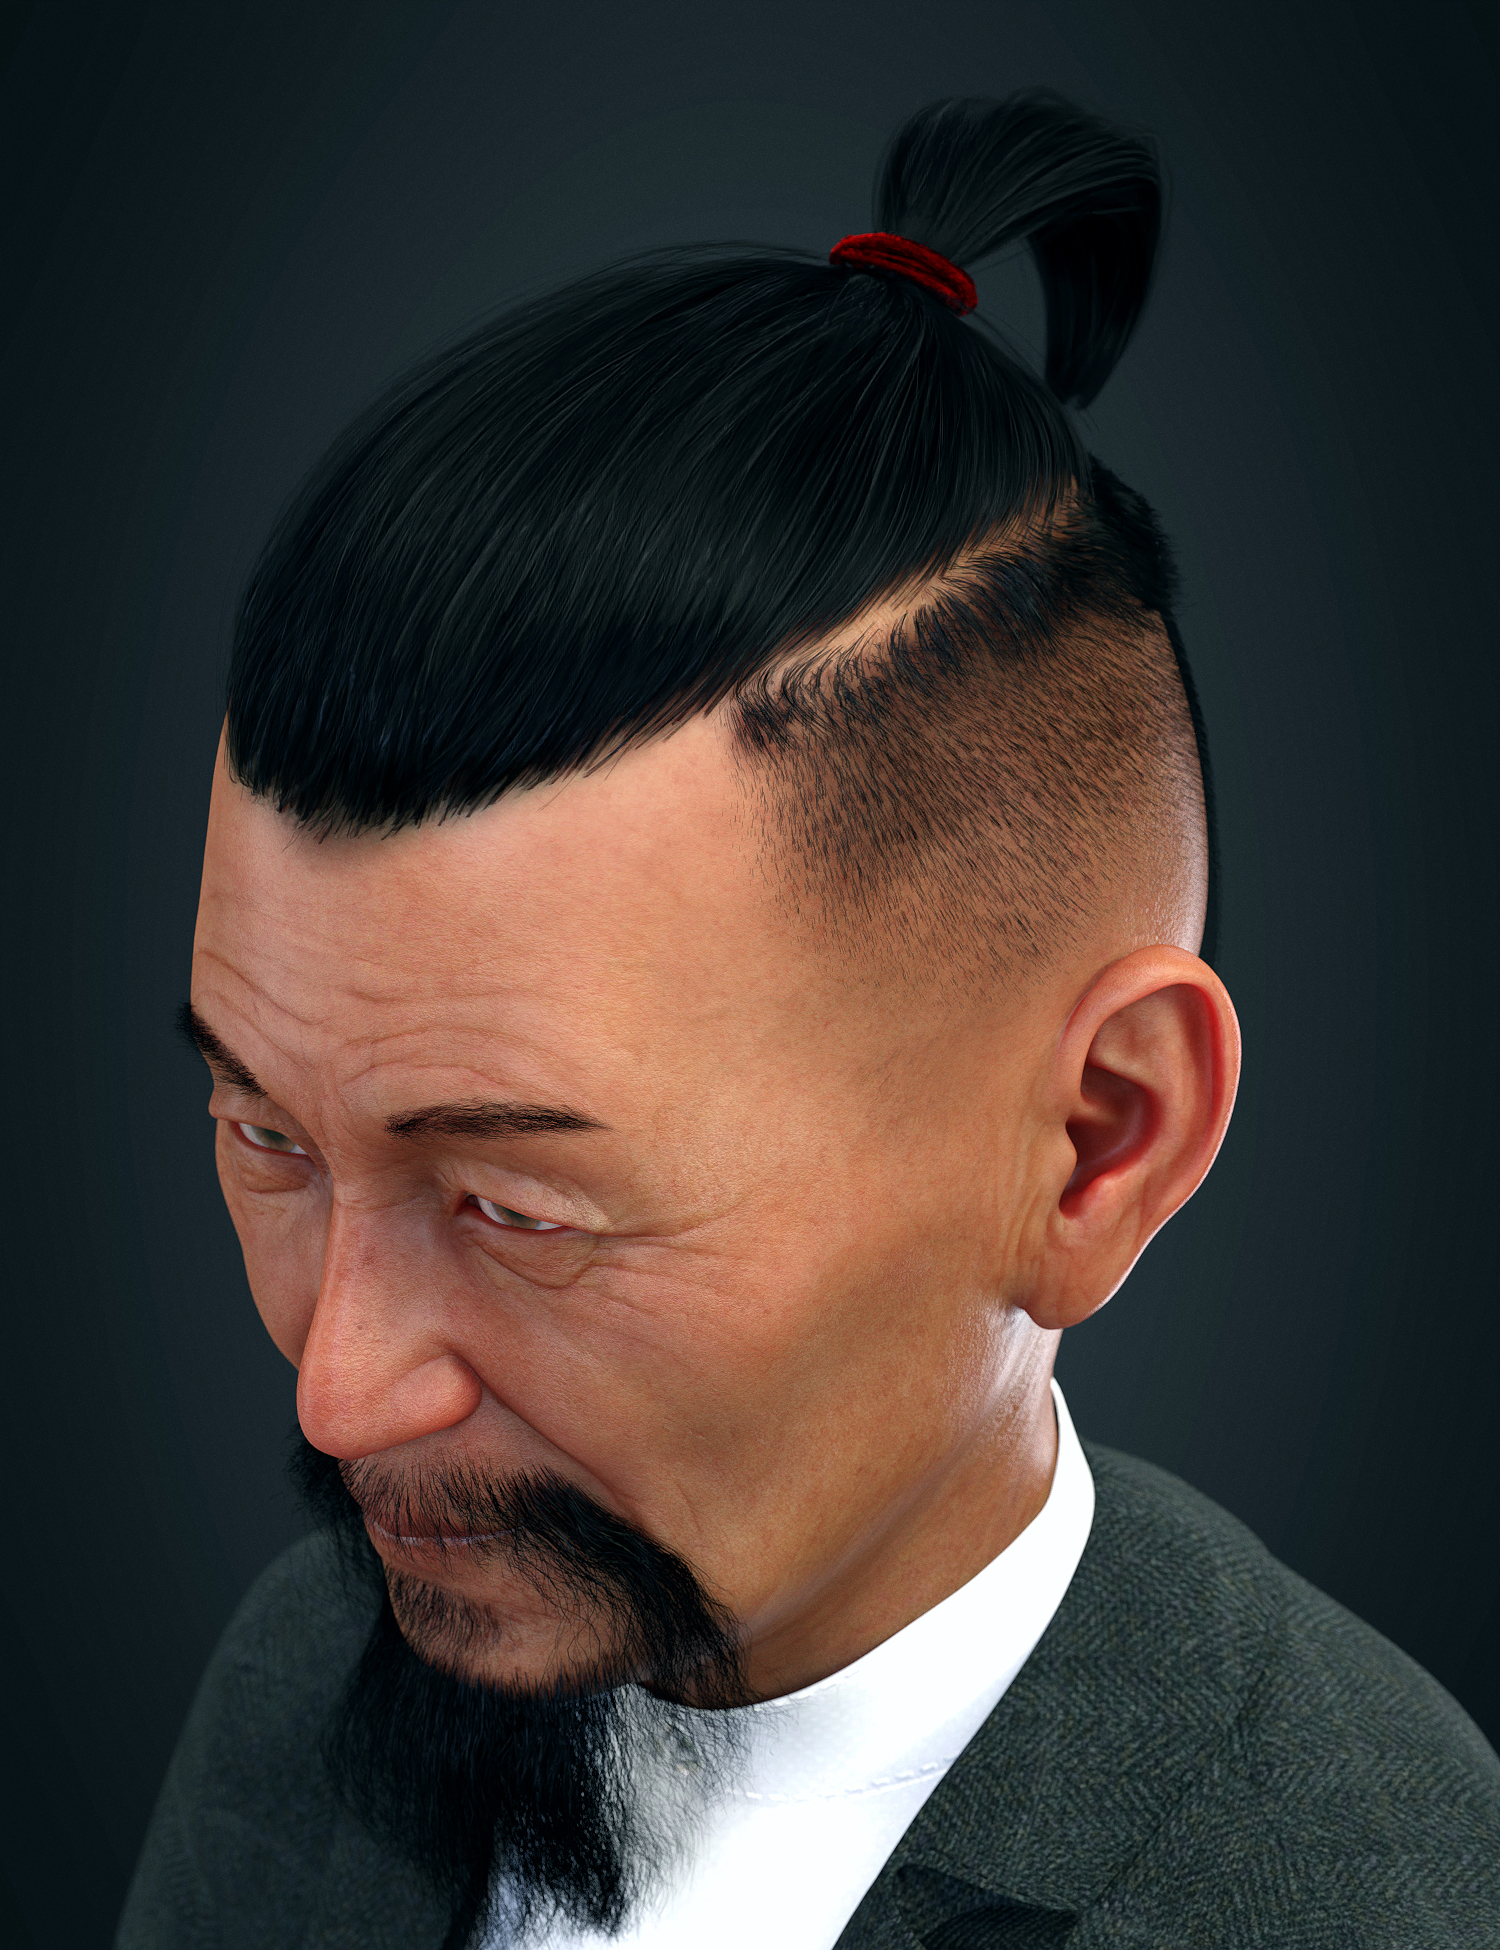 Rudolf Top Ponytail Hair for Genesis 8 and 8.1 Males